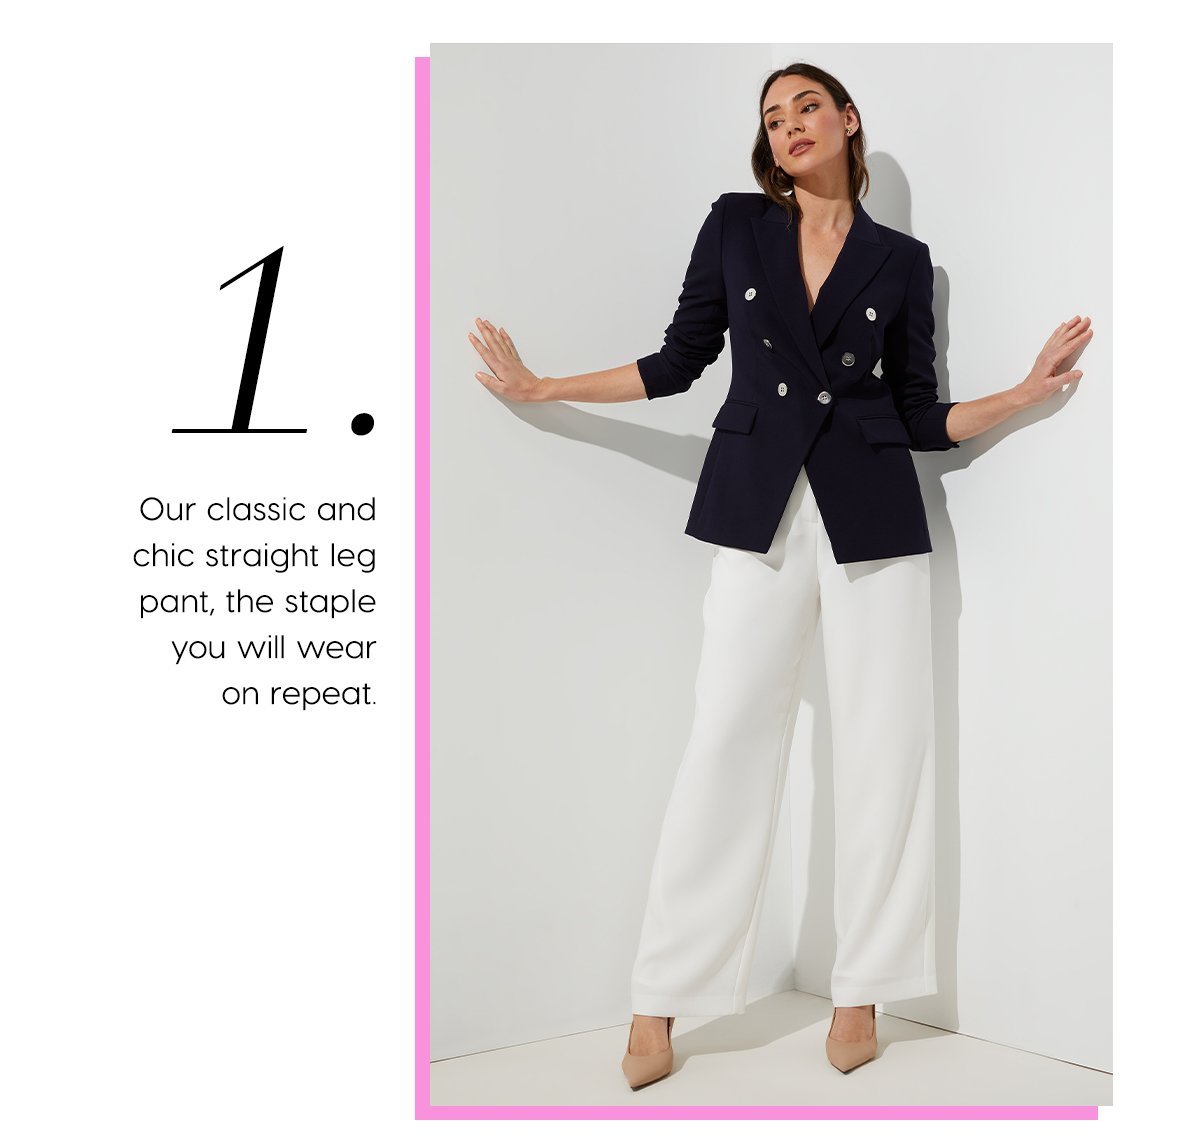 1. Our classic and chic straight leg pant, the staple you will wear on repeat.